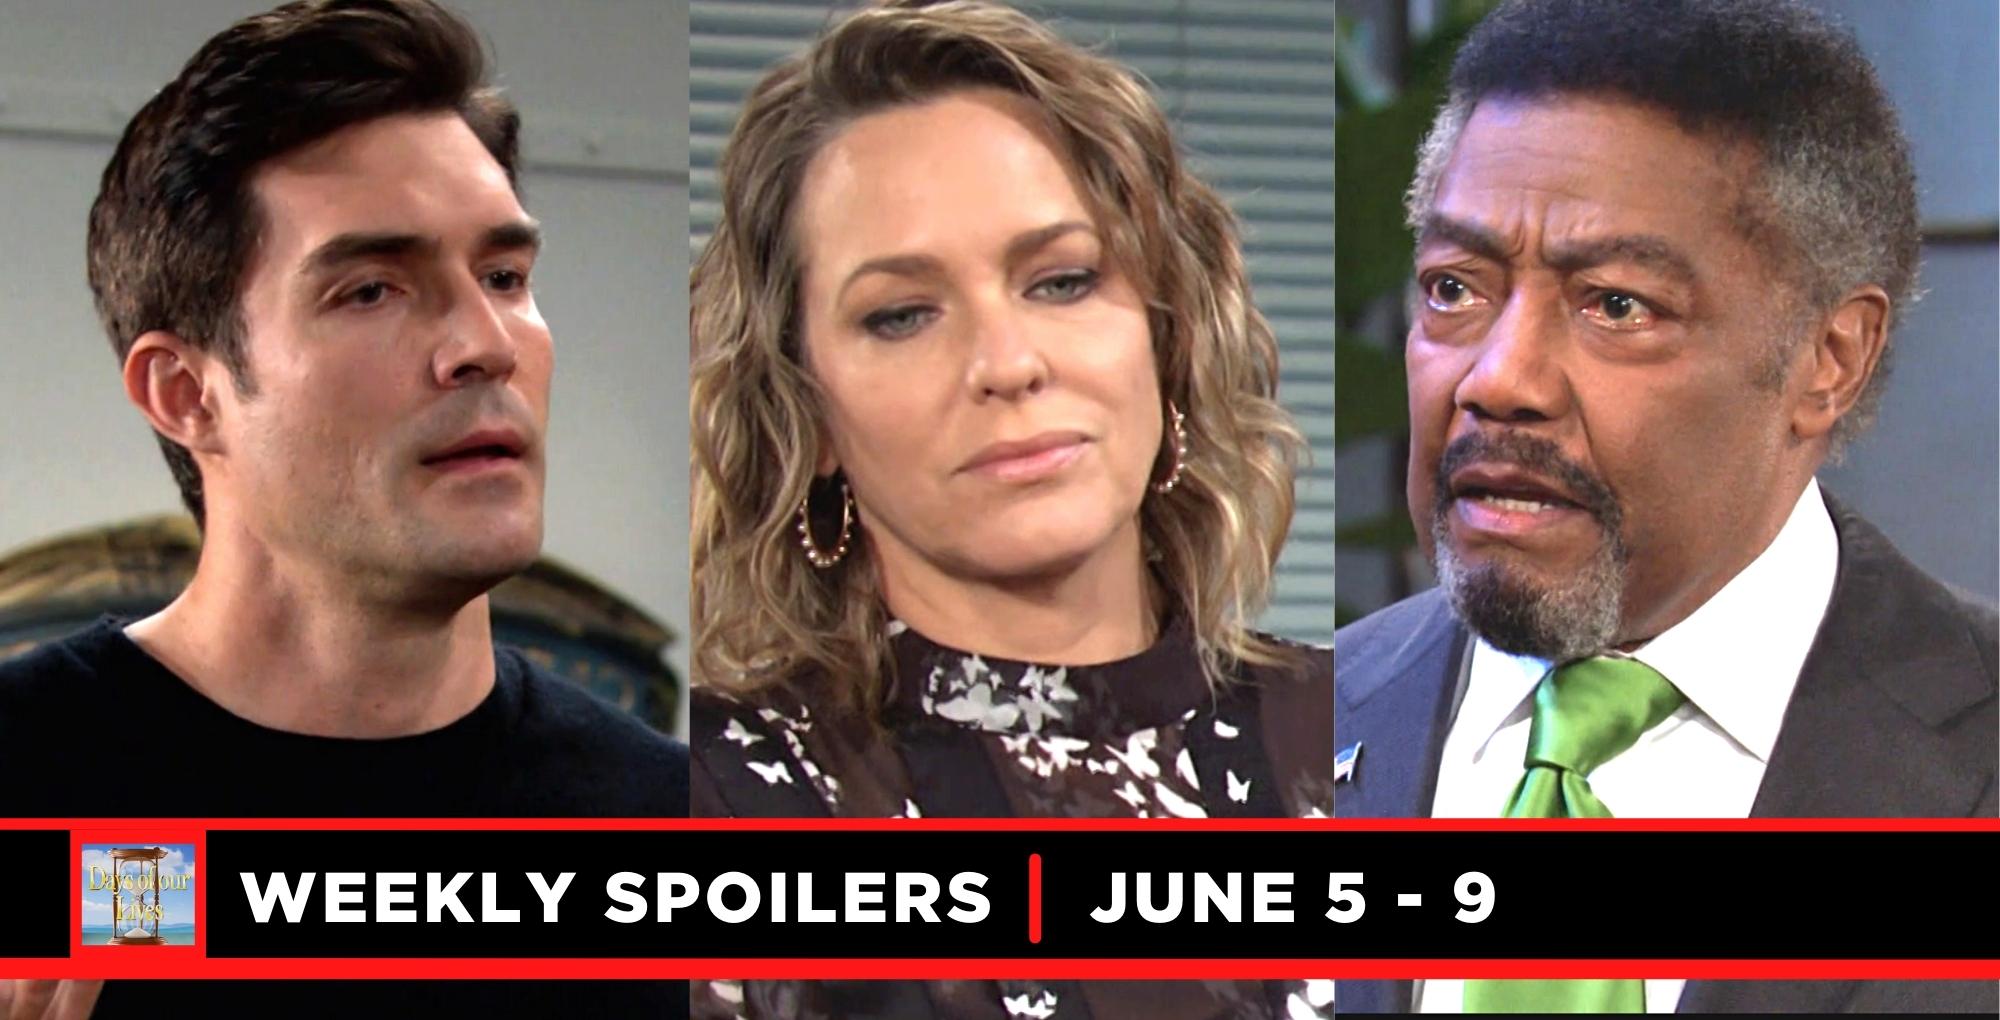 Weekly Days of our Lives Spoilers: Confusion, Shocks, and a Proposal